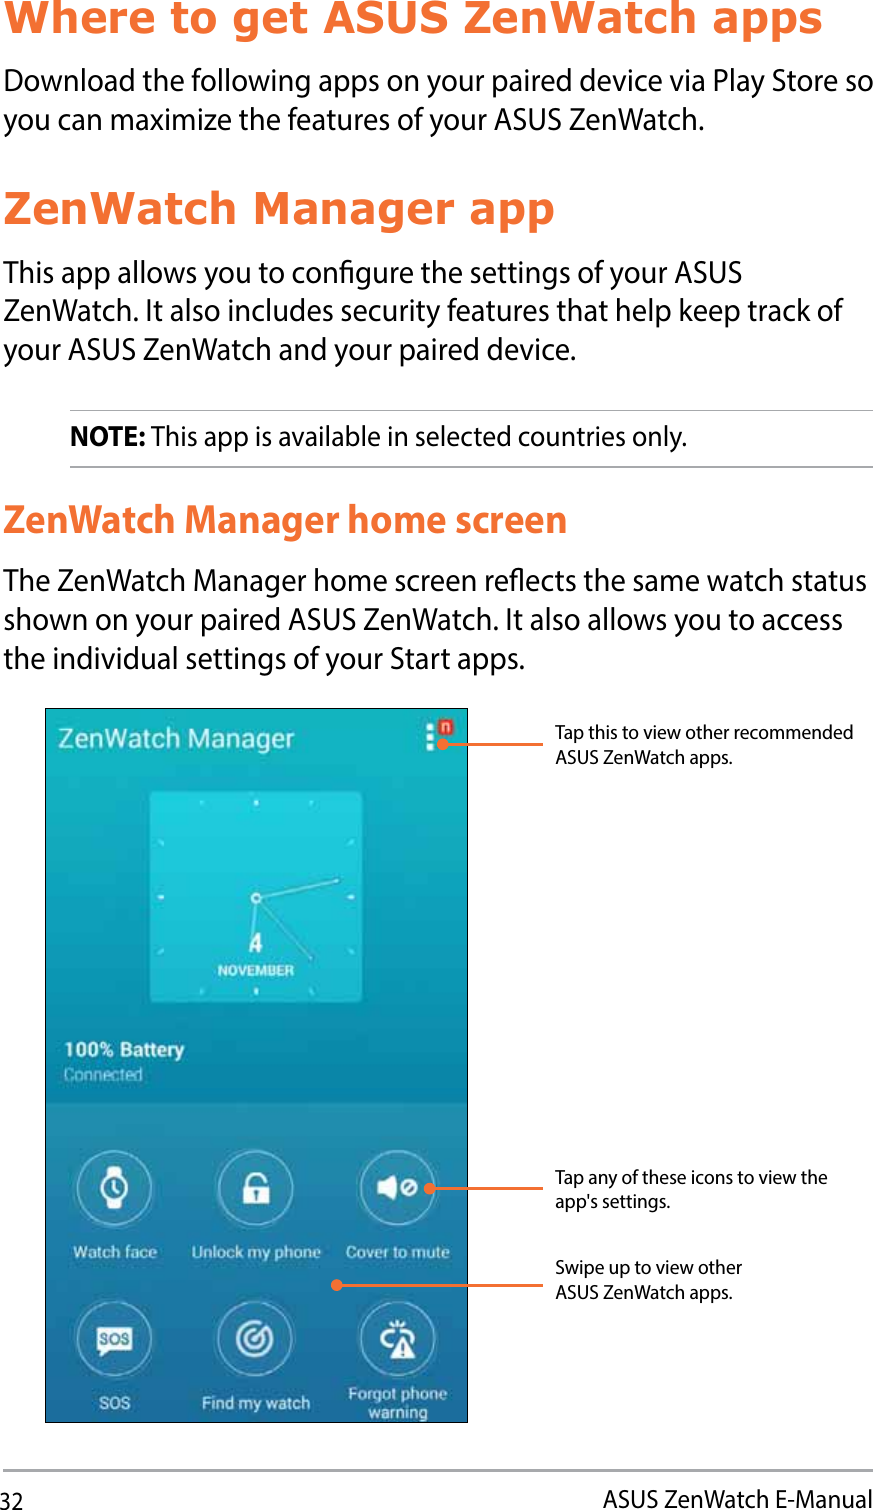 32ASUS ZenWatch E-ManualWhere to get ASUS ZenWatch appsDownload the following apps on your paired device via Play Store so you can maximize the features of your ASUS ZenWatch. ZenWatch Manager appThis app allows you to congure the settings of your ASUS ZenWatch. It also includes security features that help keep track of your ASUS ZenWatch and your paired device. NOTE: This app is available in selected countries only.ZenWatch Manager home screenThe ZenWatch Manager home screen reects the same watch status shown on your paired ASUS ZenWatch. It also allows you to access the individual settings of your Start apps.Swipe up to view other ASUS ZenWatch apps.Tap any of these icons to view the app&apos;s settings.Tap this to view other recommended ASUS ZenWatch apps. 